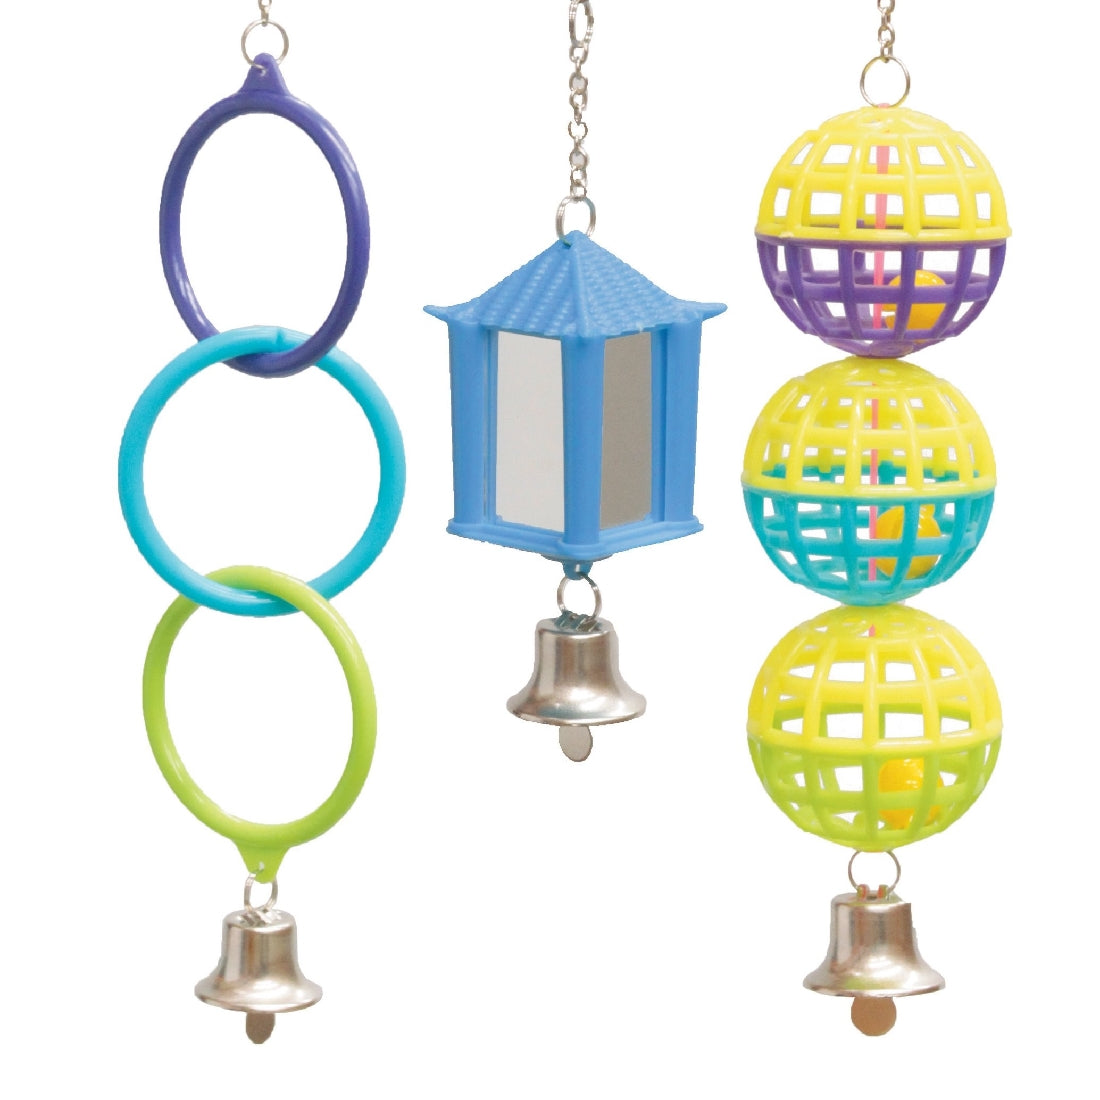 Colorful hanging bird toy with rings, lantern, and balls with bells.